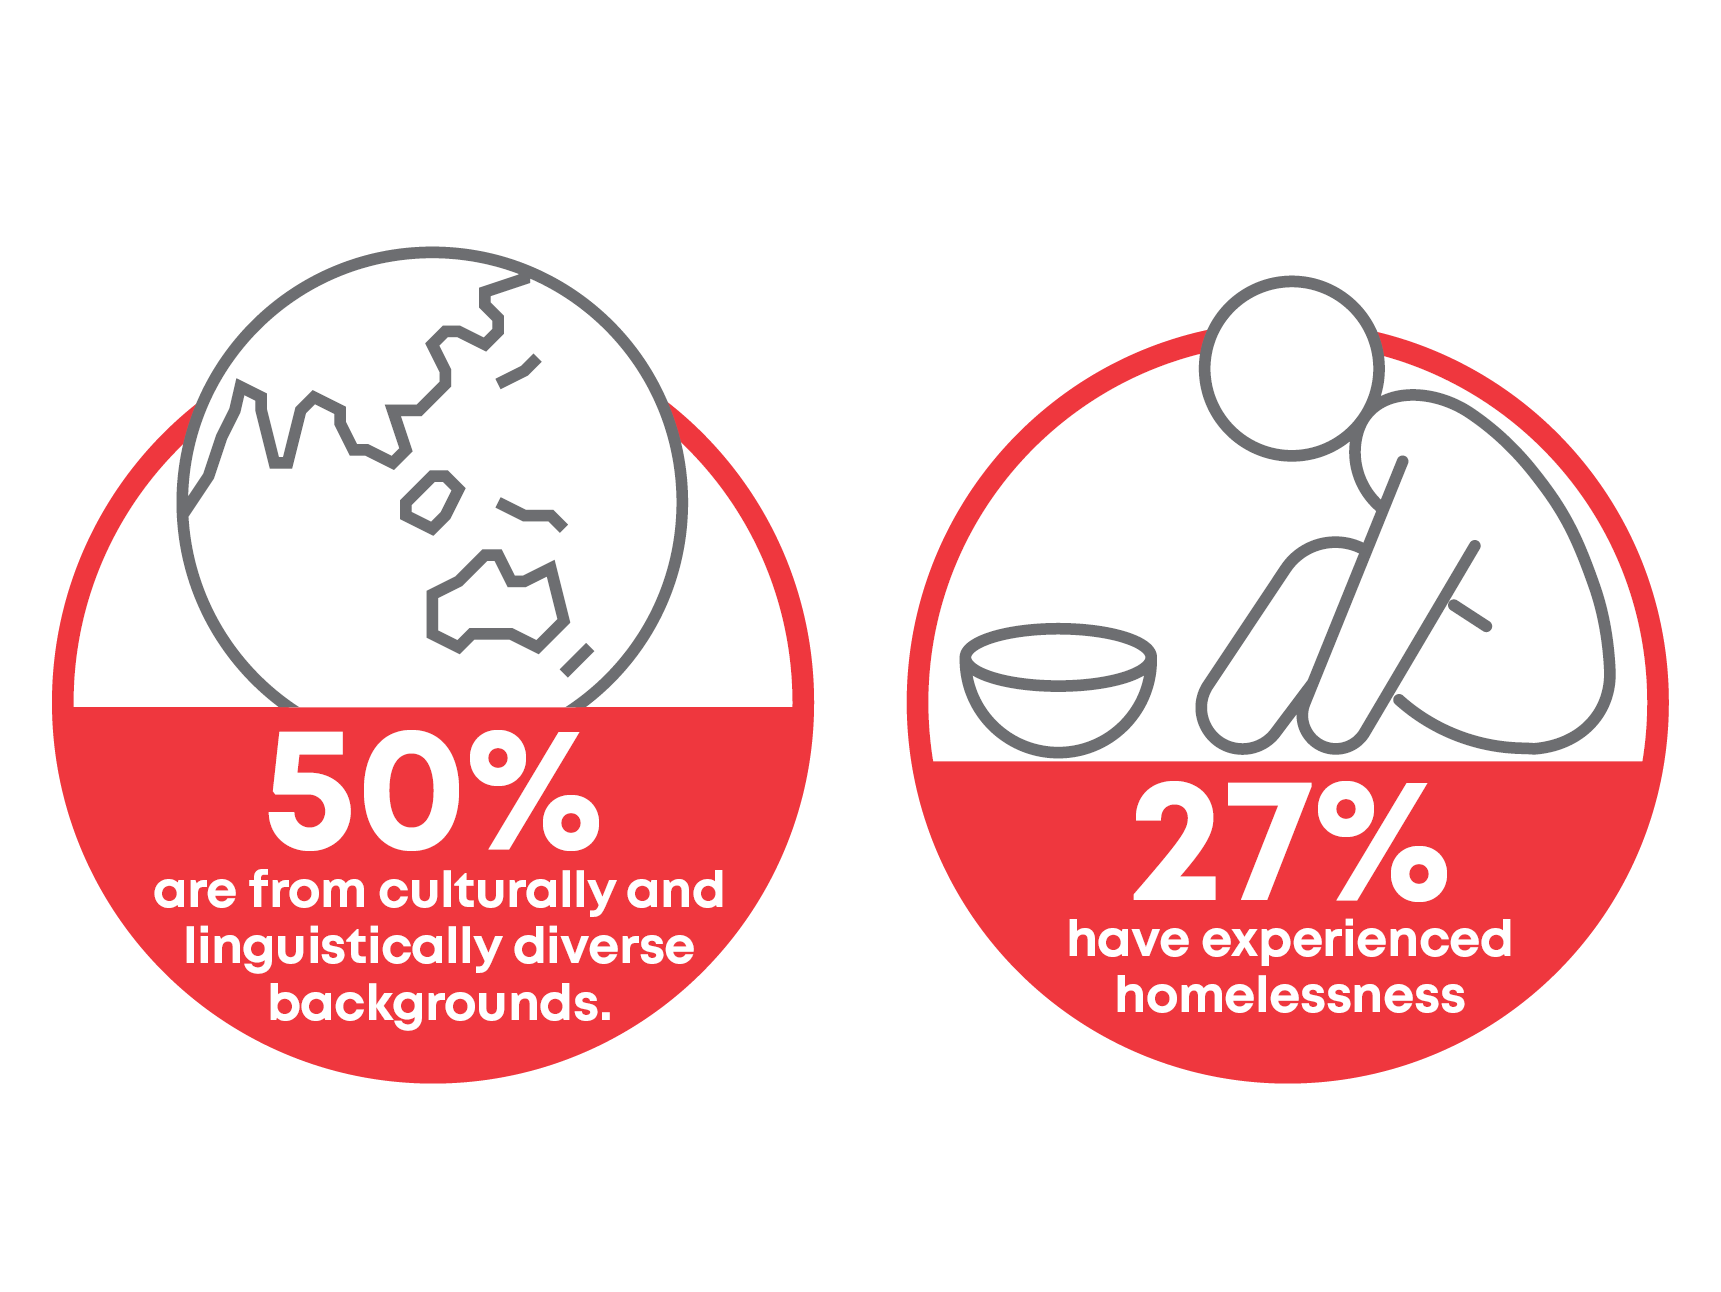 50% of ReBuild participants are from culturally and linguistically diverse backgrounds and 27% have experienced homelessness.